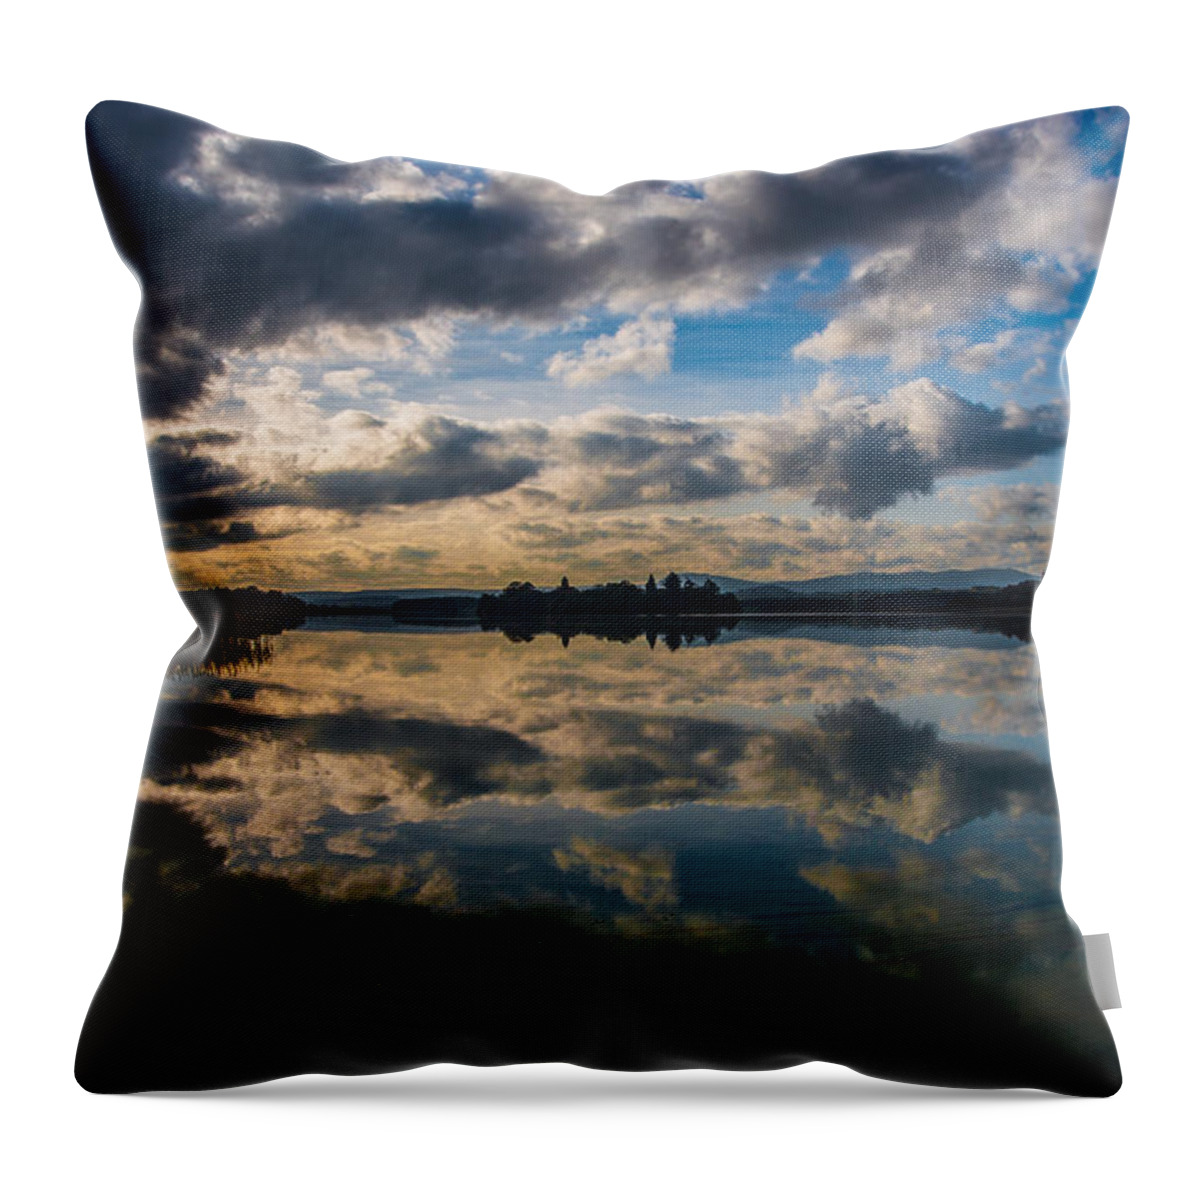 Inchmahome Throw Pillow featuring the photograph Inchmahome Priory by Nigel R Bell